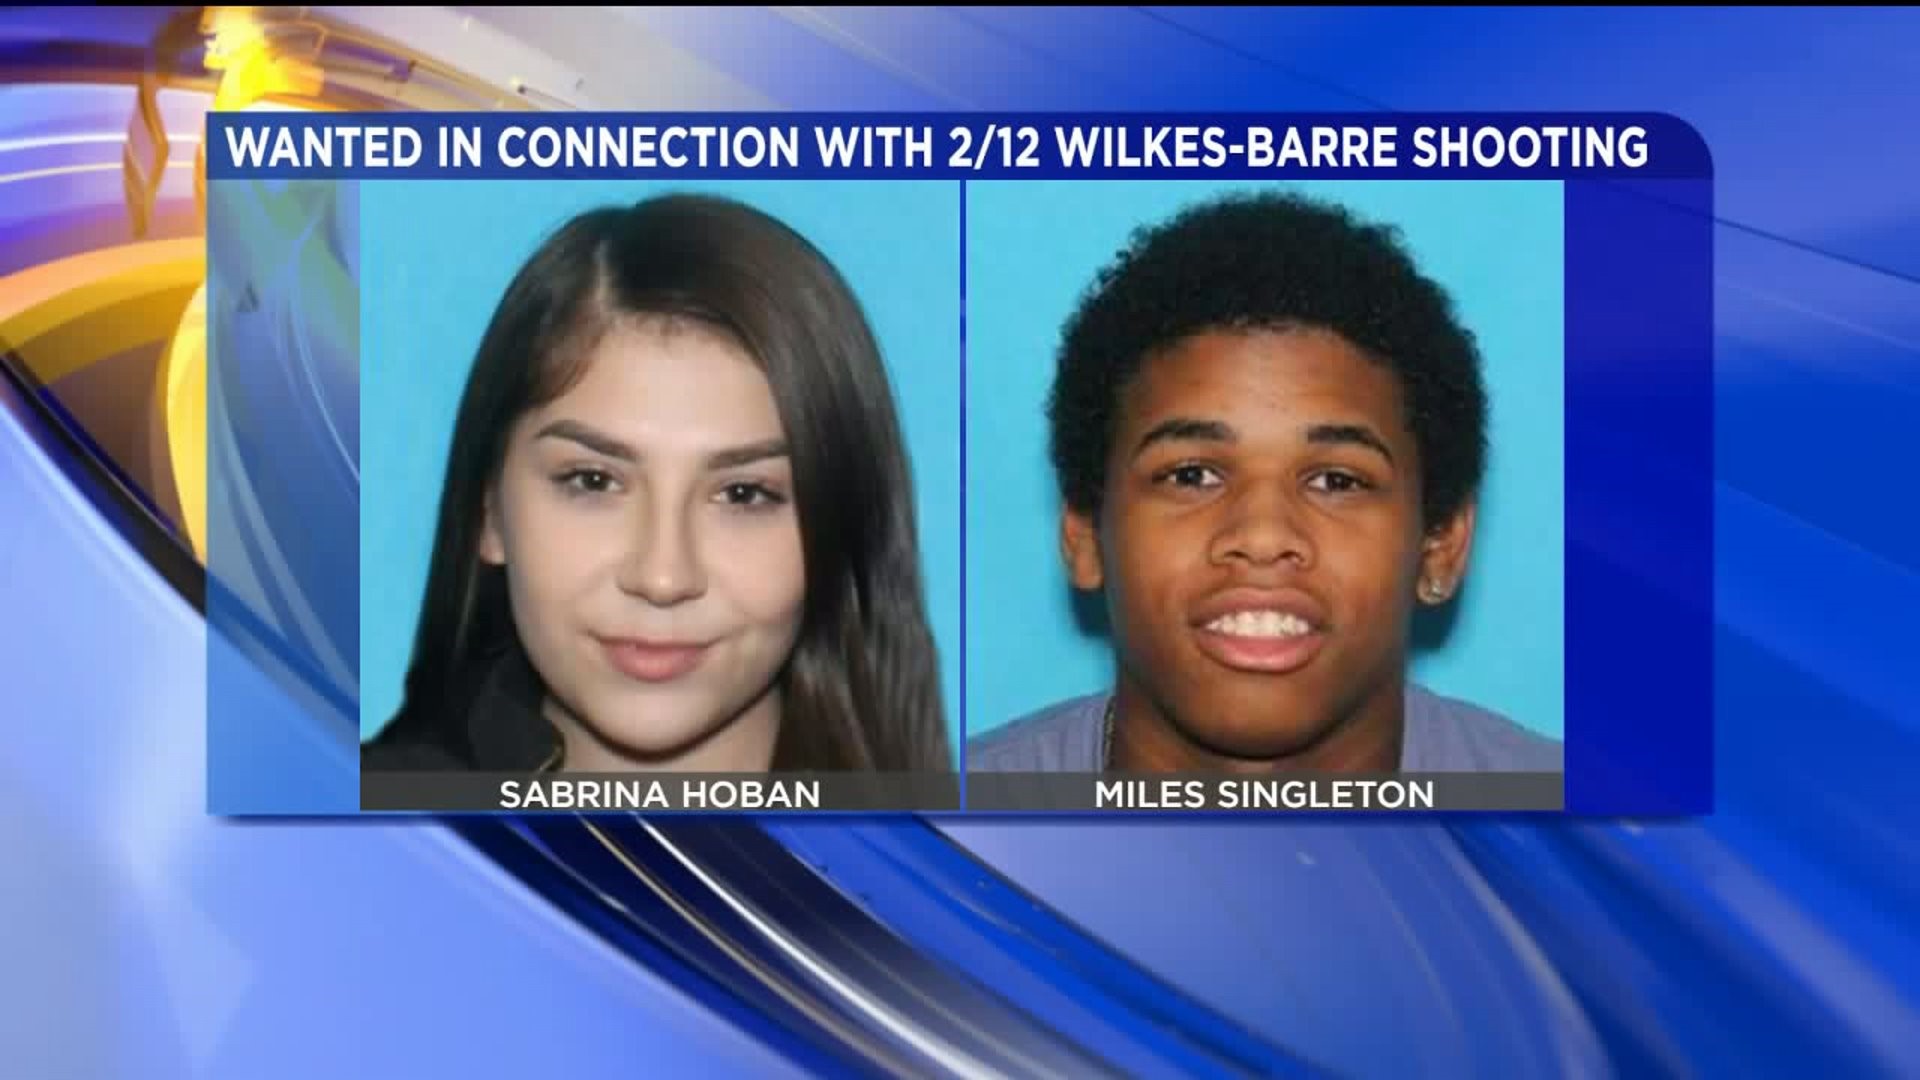 Police Looking for Two People Connected to Shooting in Wilkes-Barre that Injured Two Women